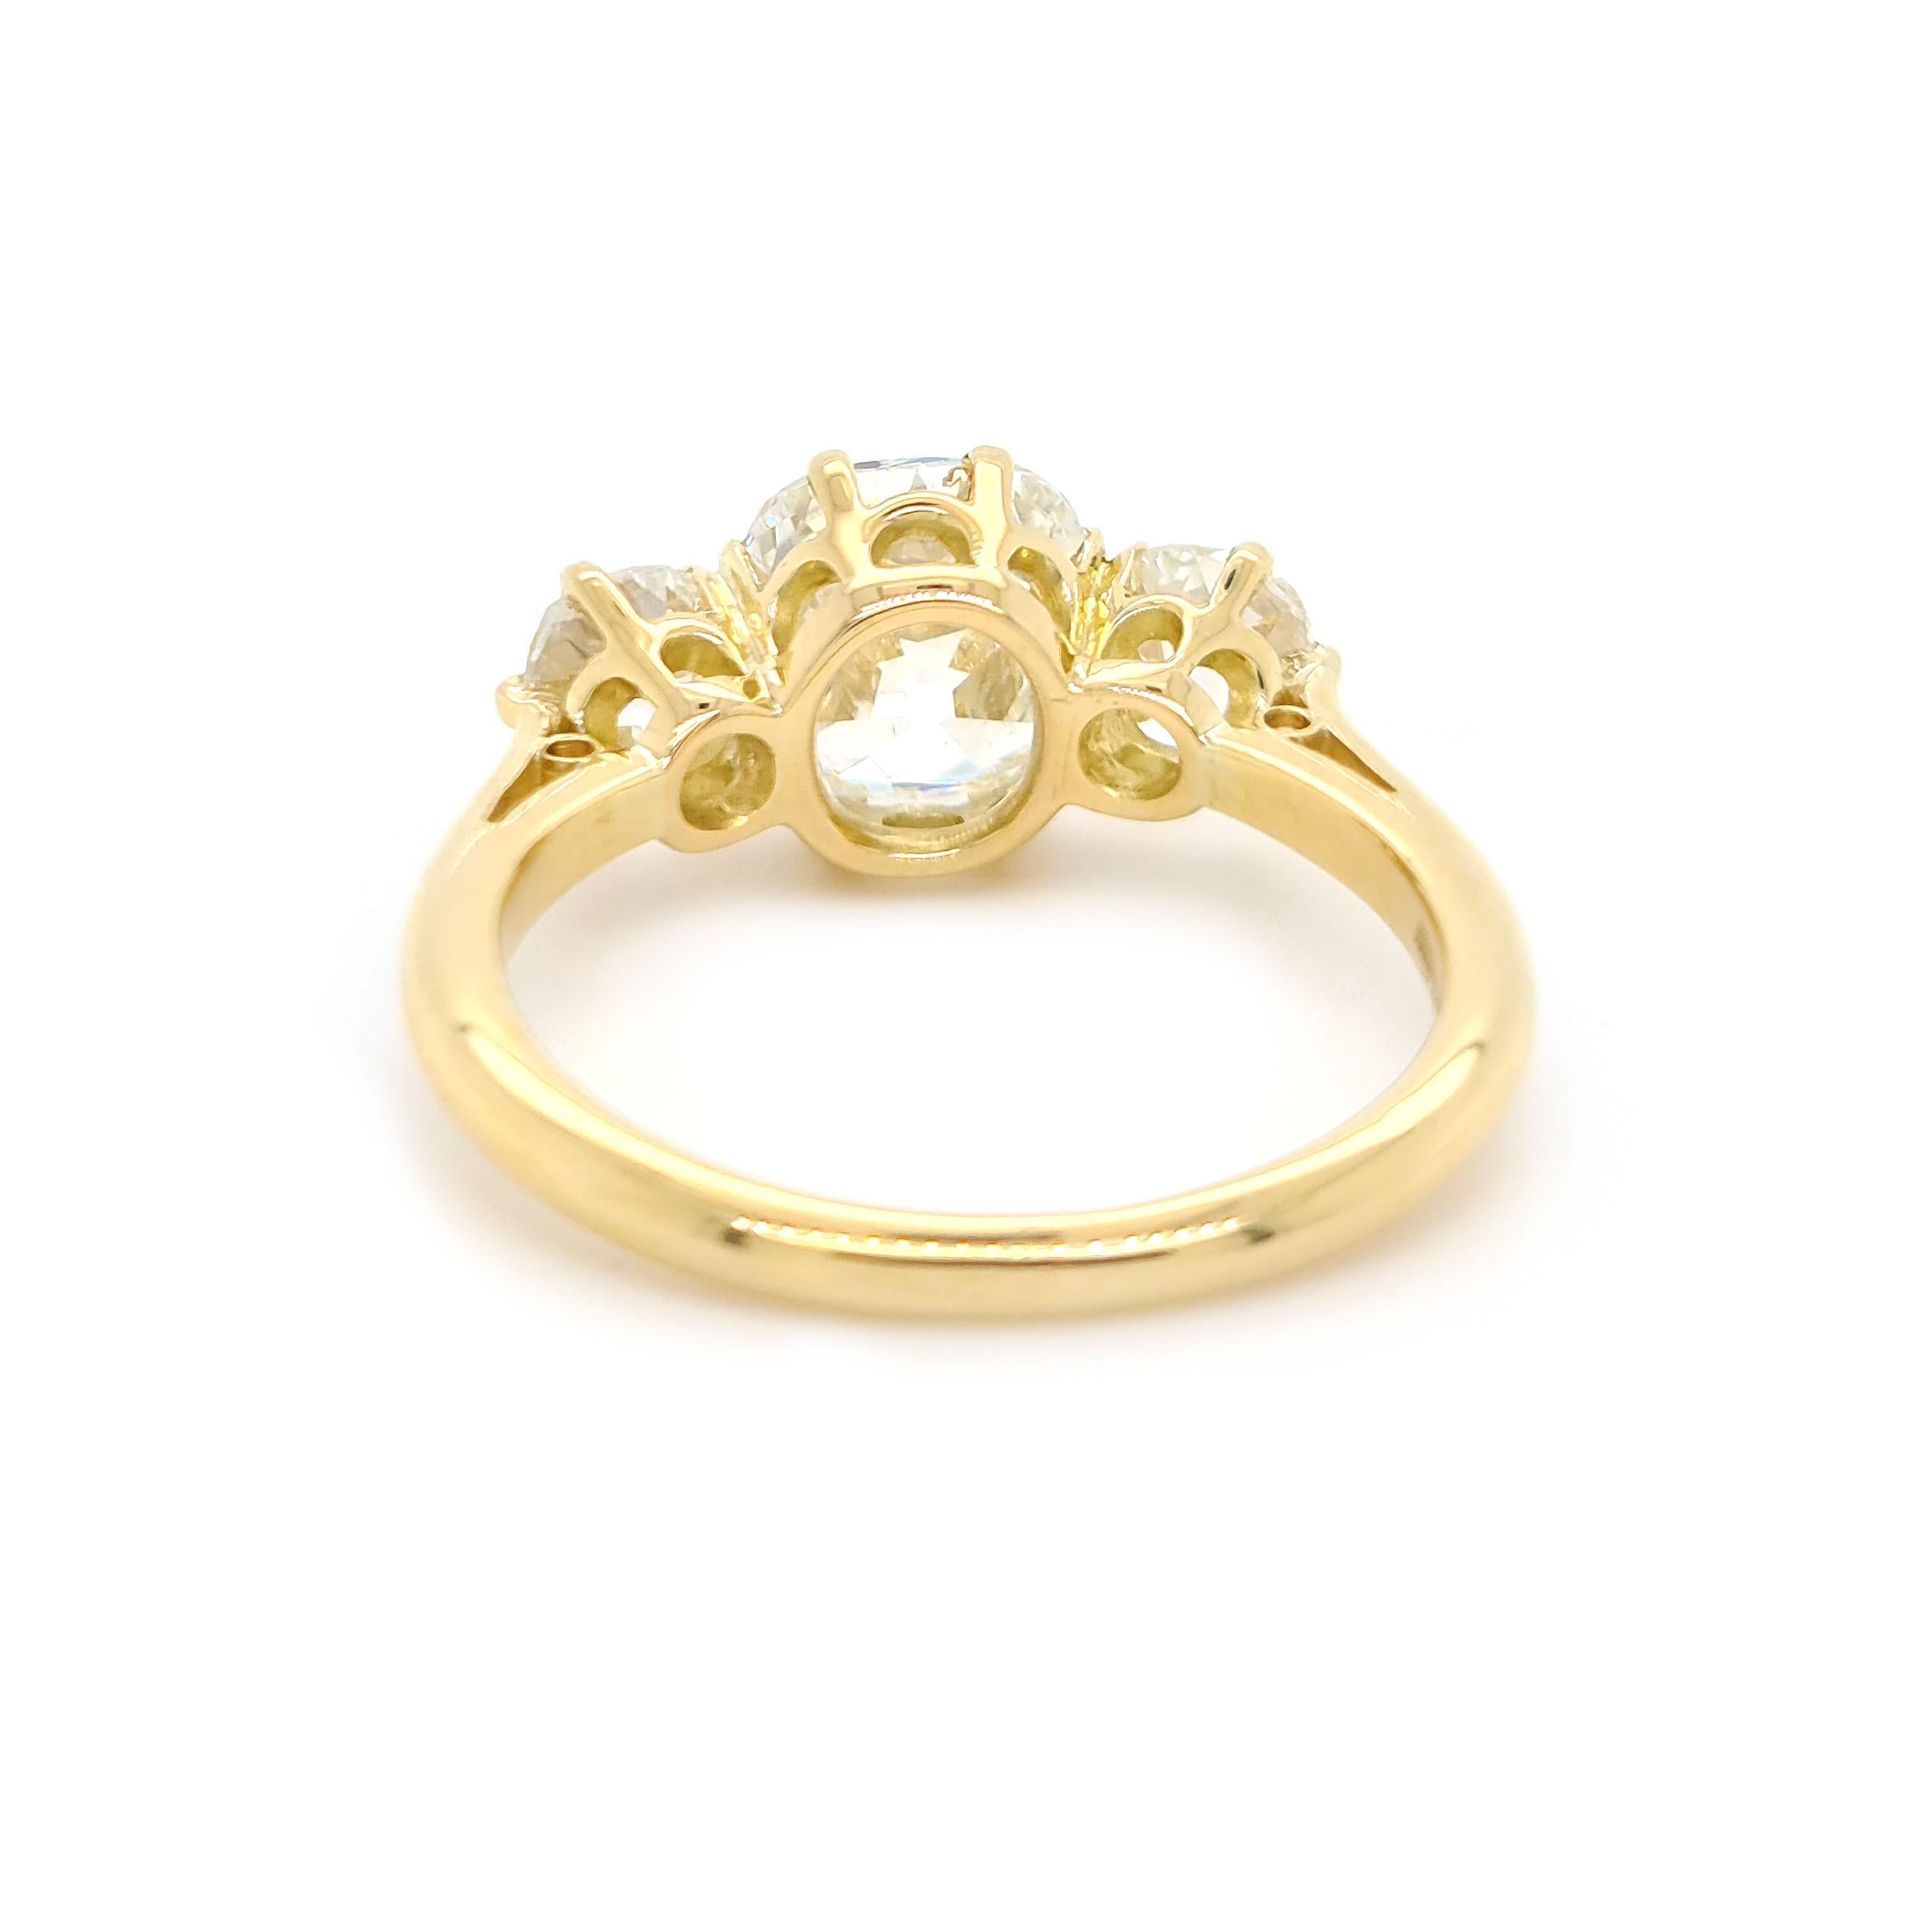 Edwardian Style Three Stone Diamond And Gold Ring, 2.00 Carats J SI1 For Sale 2